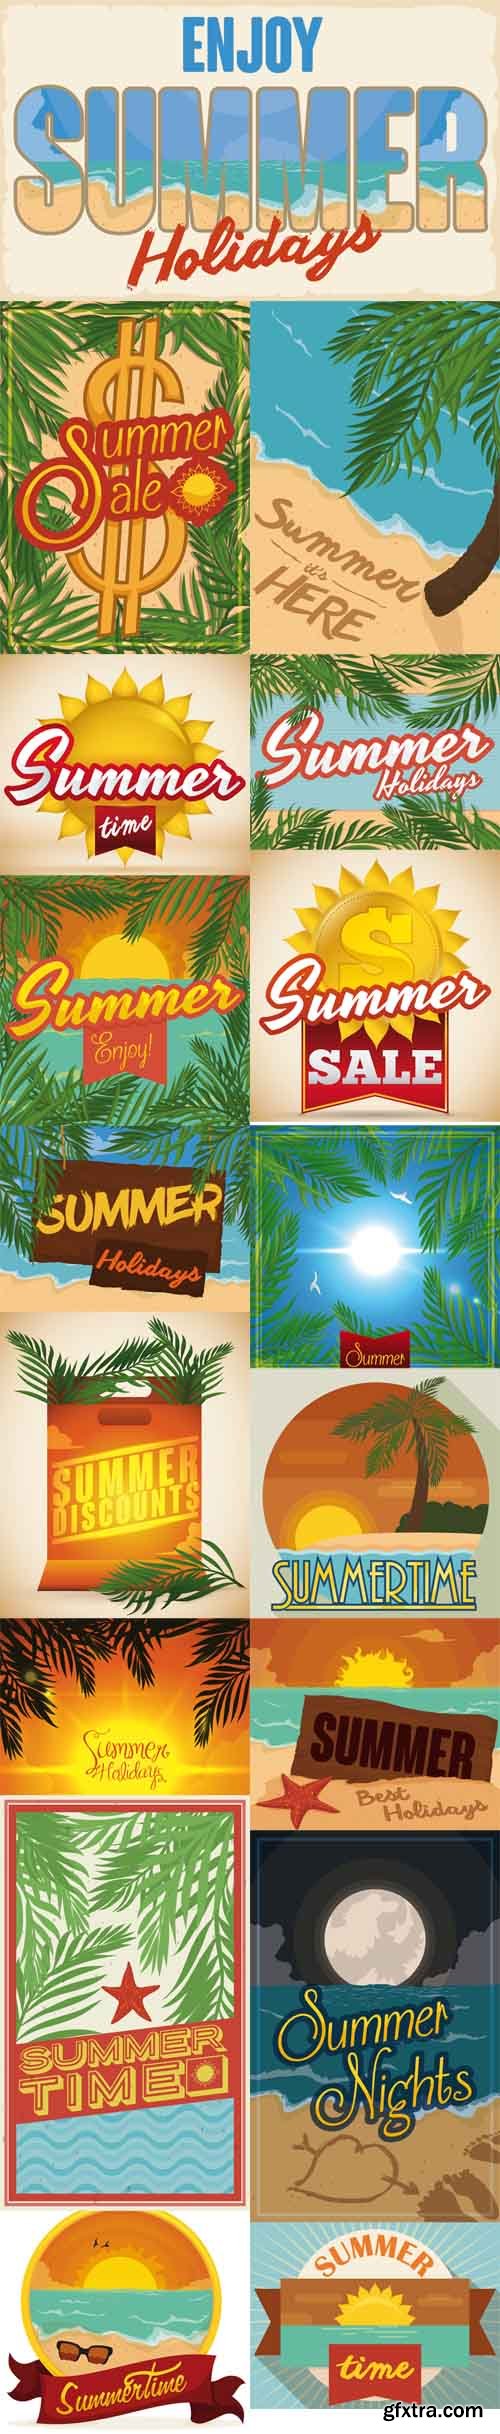 Vector Set - Summertime Banners on Beach and Palm Trees